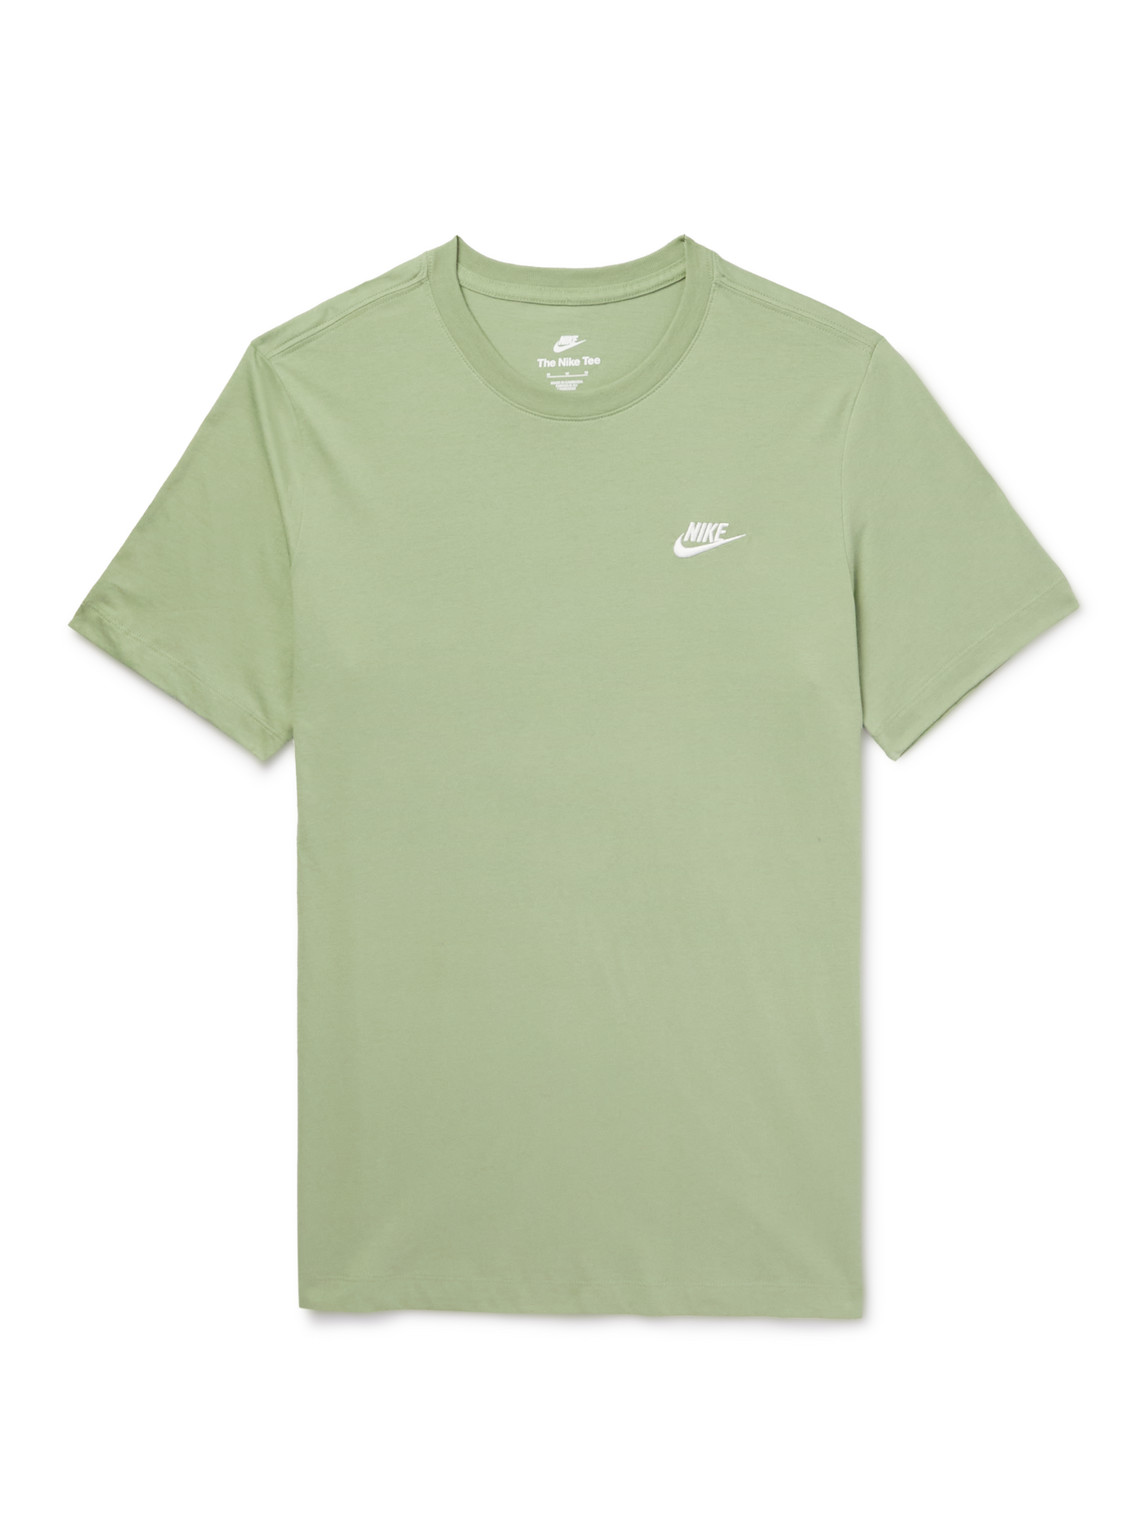 NIKE NSW LOGO-EMBROIDERED COTTON-JERSEY T-SHIRT